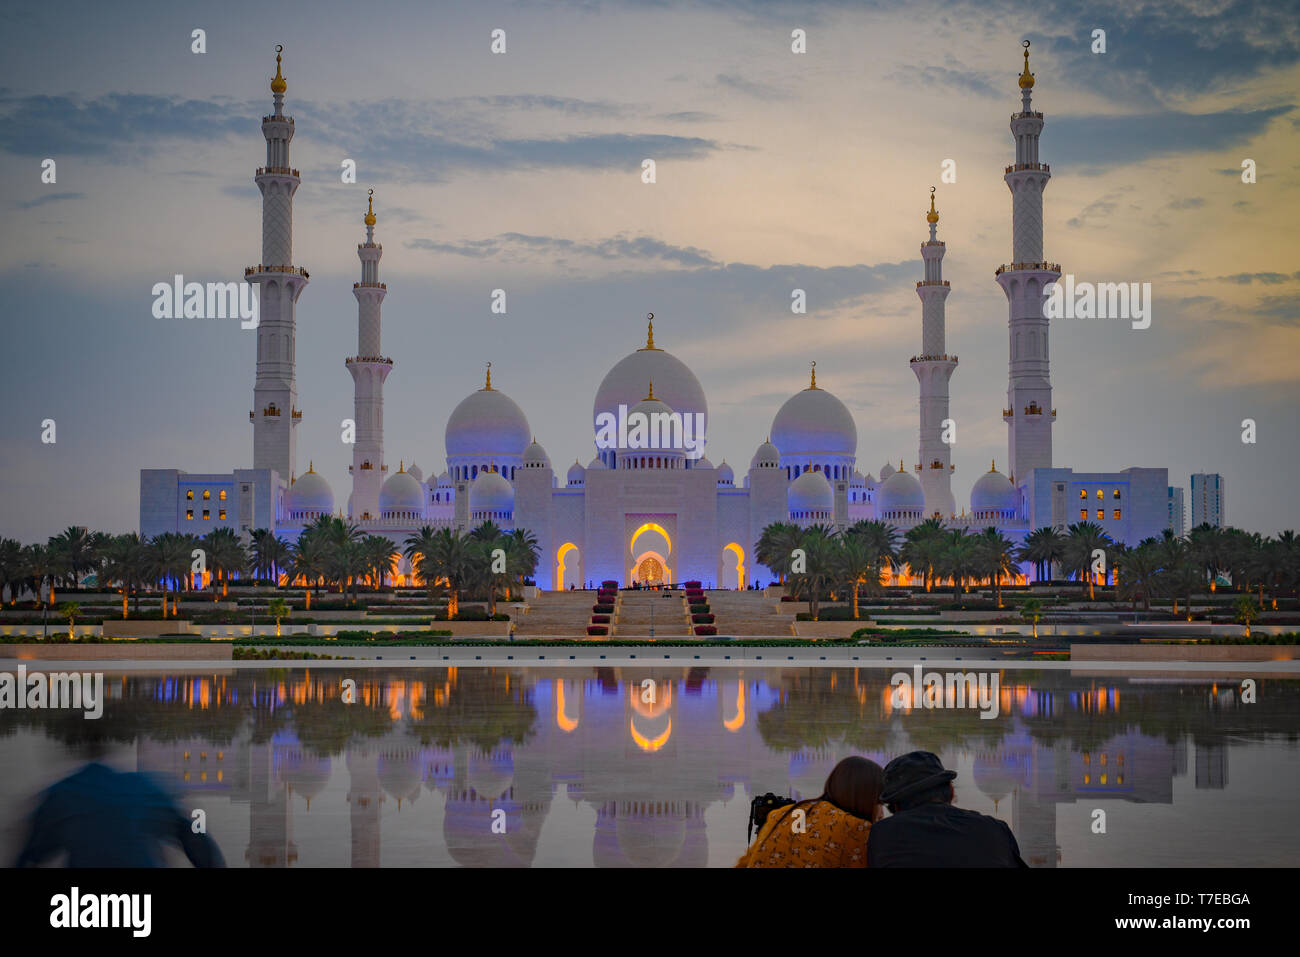 Axial view of the Great Mosque of Abu Dhabi at dusk with reflection over a water mirror with a couple seen from behind, United Arab Emirate Stock Photo